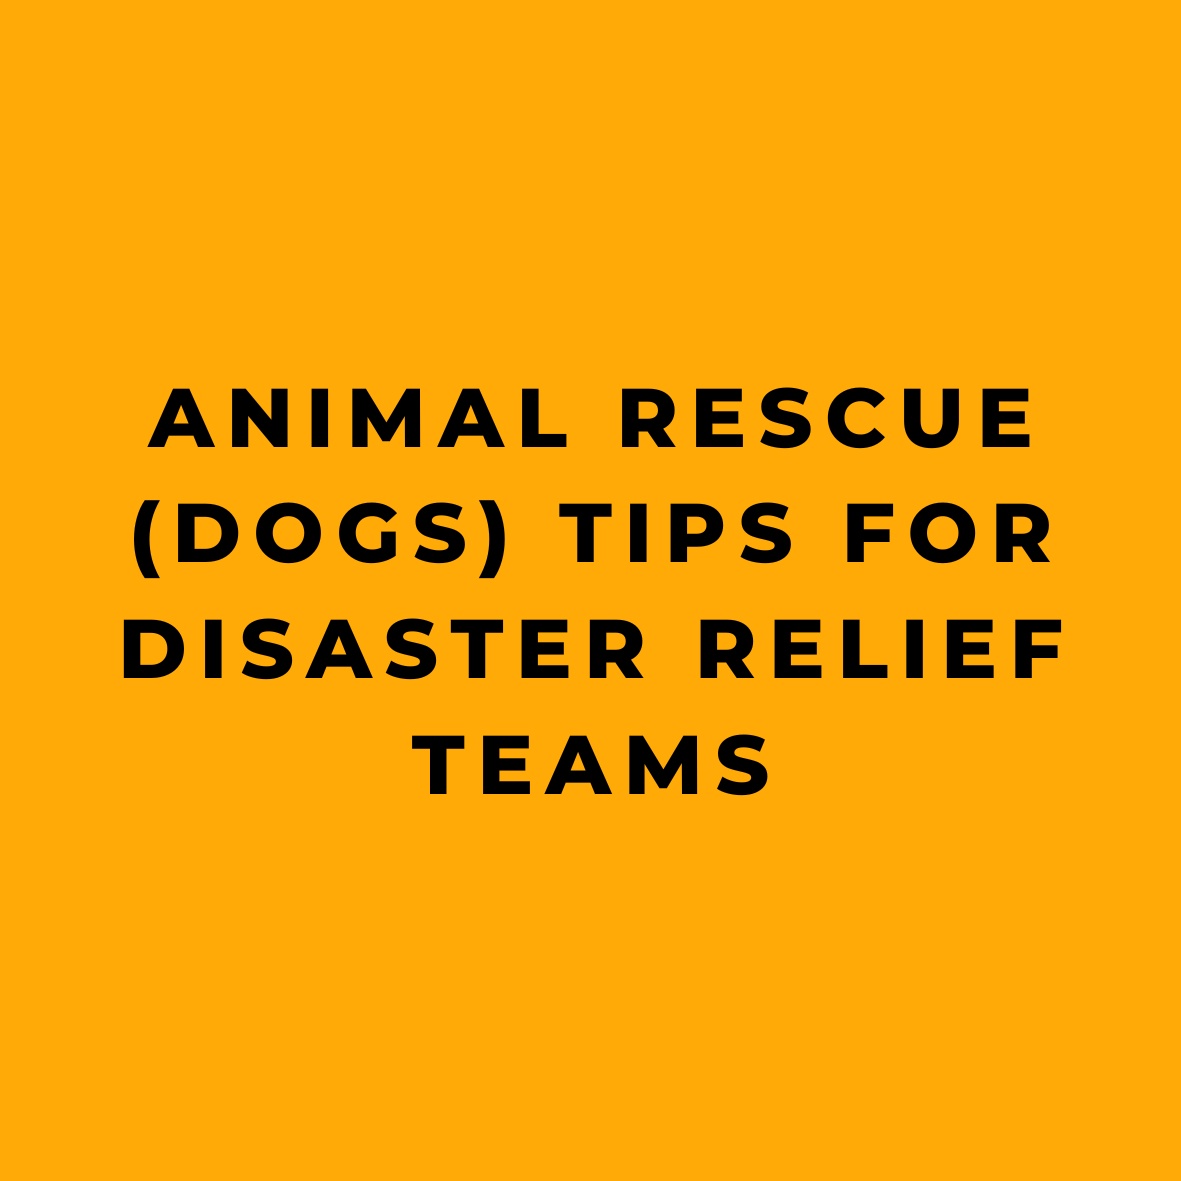 Animal Rescue (Dogs) Tips for Disaster Relief Teams